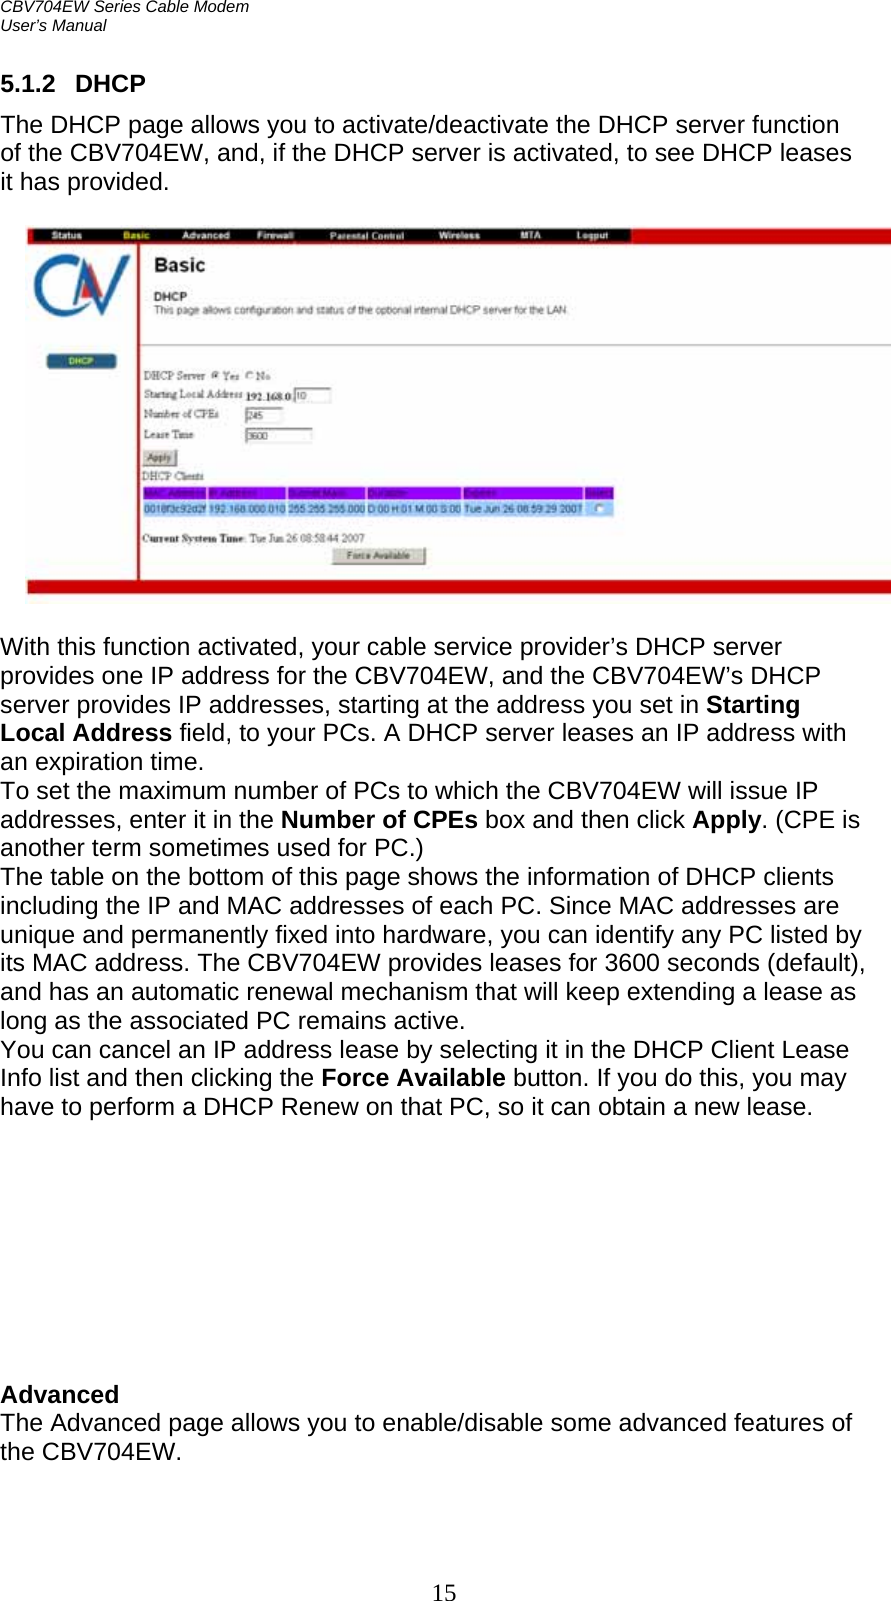 CBV704EW Series Cable Modem  User’s Manual   15 5.1.2 DHCP The DHCP page allows you to activate/deactivate the DHCP server function of the CBV704EW, and, if the DHCP server is activated, to see DHCP leases it has provided.    With this function activated, your cable service provider’s DHCP server provides one IP address for the CBV704EW, and the CBV704EW’s DHCP server provides IP addresses, starting at the address you set in Starting Local Address field, to your PCs. A DHCP server leases an IP address with an expiration time. To set the maximum number of PCs to which the CBV704EW will issue IP addresses, enter it in the Number of CPEs box and then click Apply. (CPE is another term sometimes used for PC.) The table on the bottom of this page shows the information of DHCP clients including the IP and MAC addresses of each PC. Since MAC addresses are unique and permanently fixed into hardware, you can identify any PC listed by its MAC address. The CBV704EW provides leases for 3600 seconds (default), and has an automatic renewal mechanism that will keep extending a lease as long as the associated PC remains active. You can cancel an IP address lease by selecting it in the DHCP Client Lease Info list and then clicking the Force Available button. If you do this, you may have to perform a DHCP Renew on that PC, so it can obtain a new lease.          Advanced The Advanced page allows you to enable/disable some advanced features of the CBV704EW.  